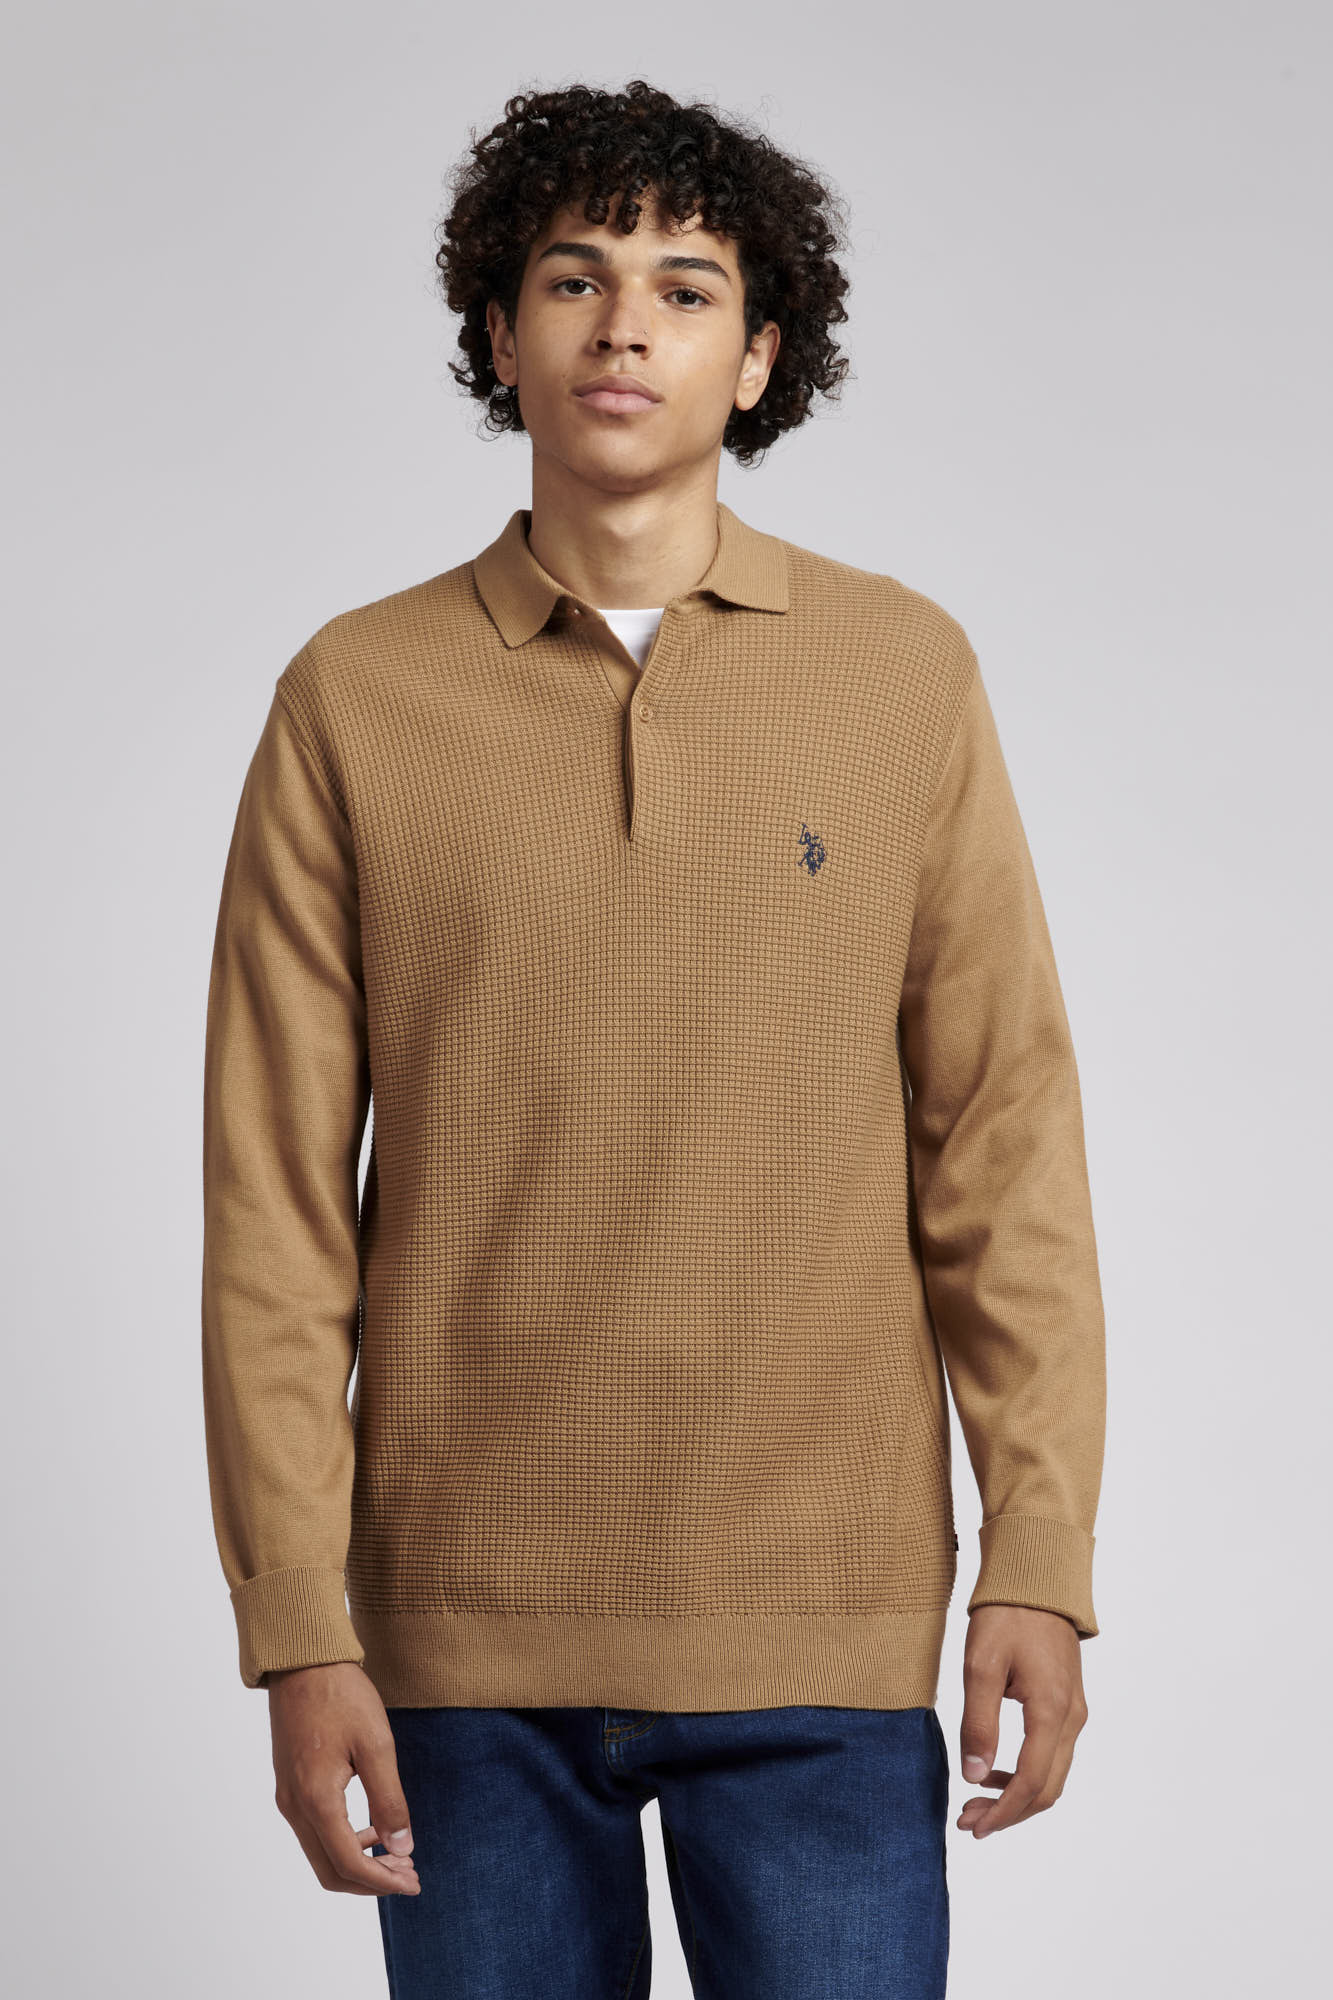 U.S. Polo Assn. Mens Textured Knitted Polo Shirt in Tigers Eye